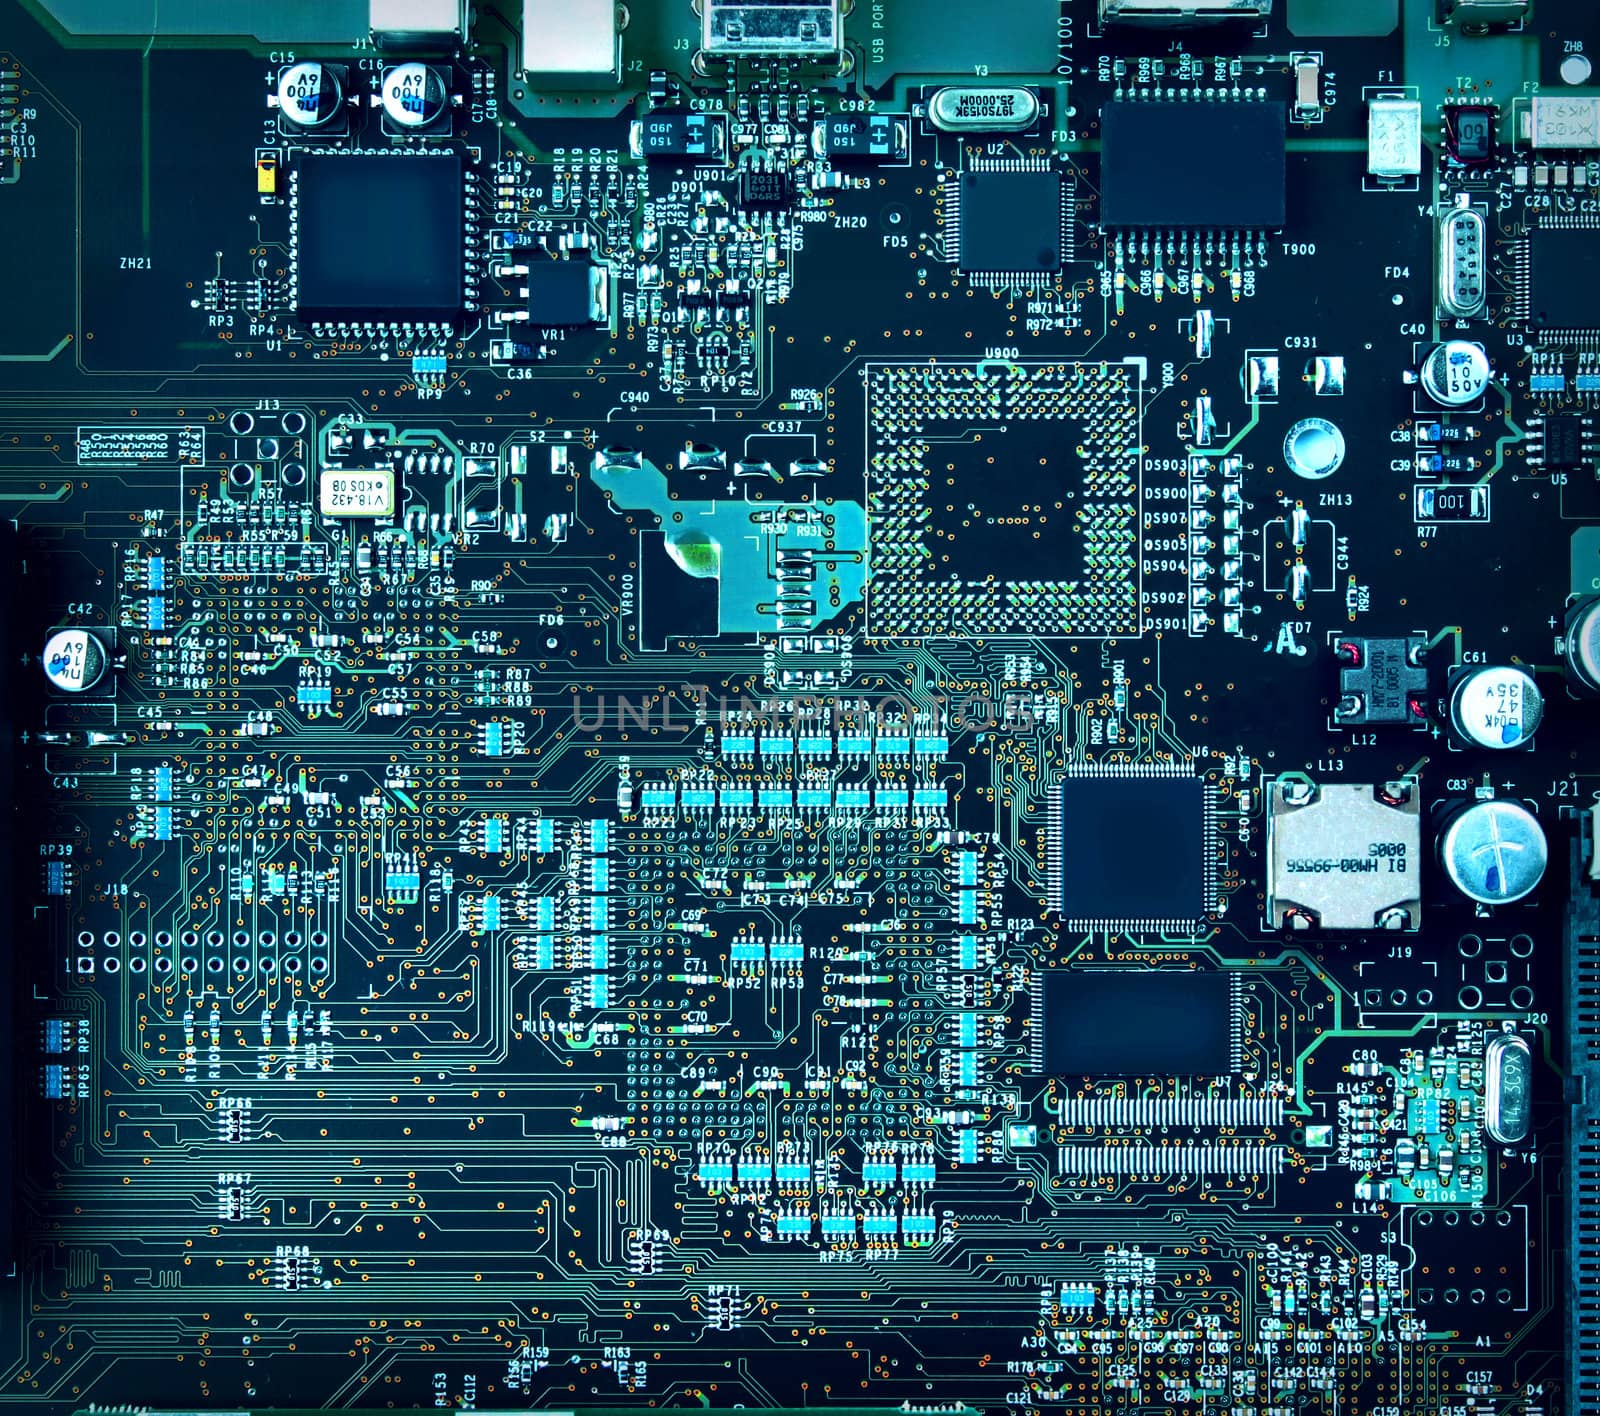 Inside computer, hardware motherboard components and circuits